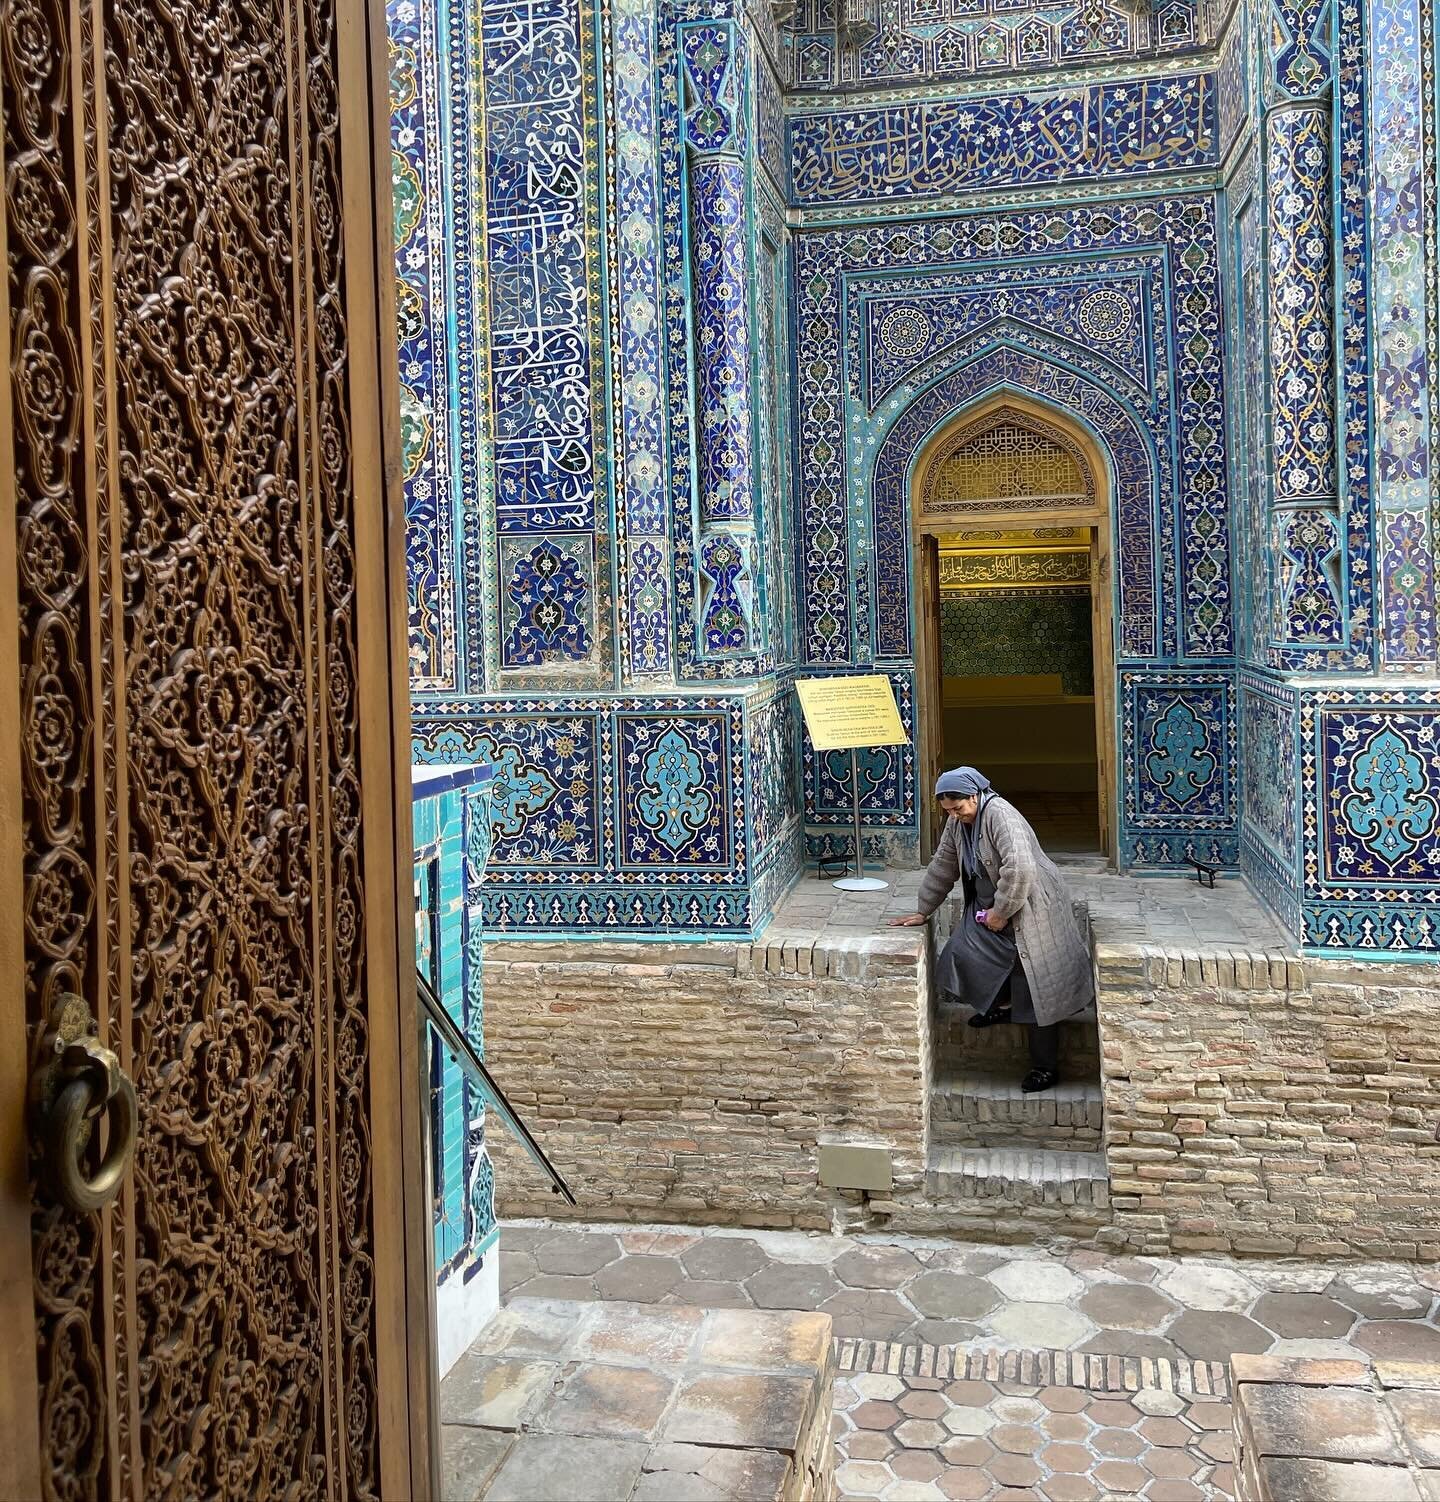 WOW!! Shahi Zinda is definitely my favorite site in Samarkand - it&rsquo;s more intimate and intricate than the larger ones. It&rsquo;s jaw droppingly beautiful!

It comprises of an avenue of mausoleums and consists of grand tombs resembling palaces,